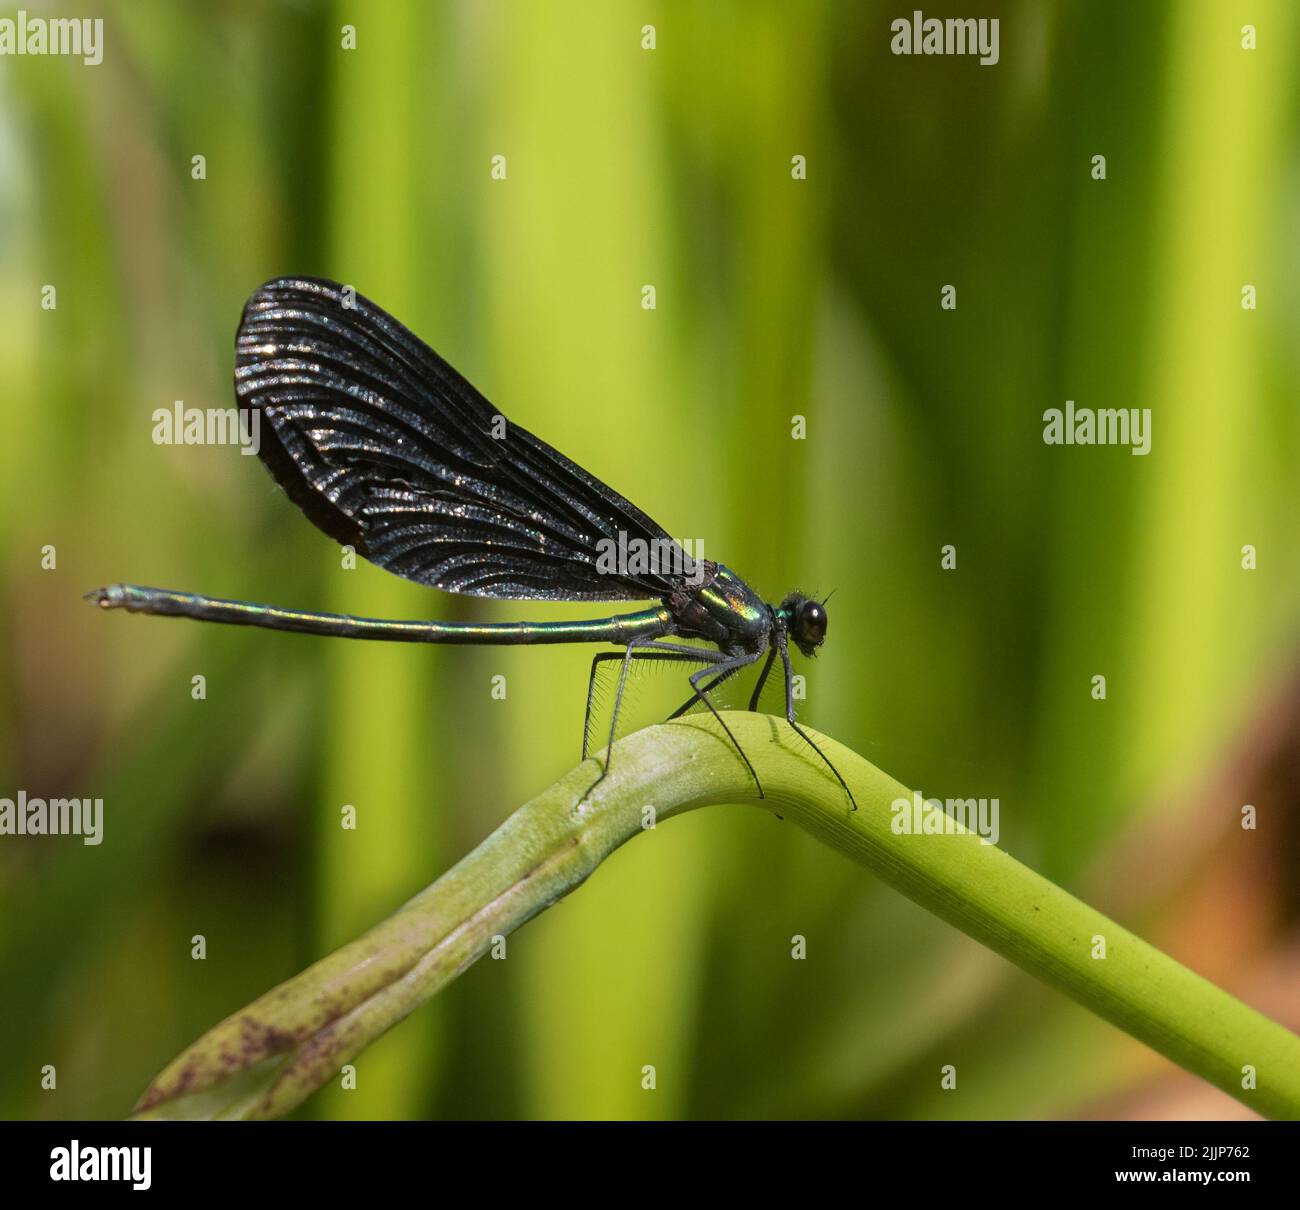 A closeup of an Ebony Jewelwing Damselfly in the reeds Stock Photo